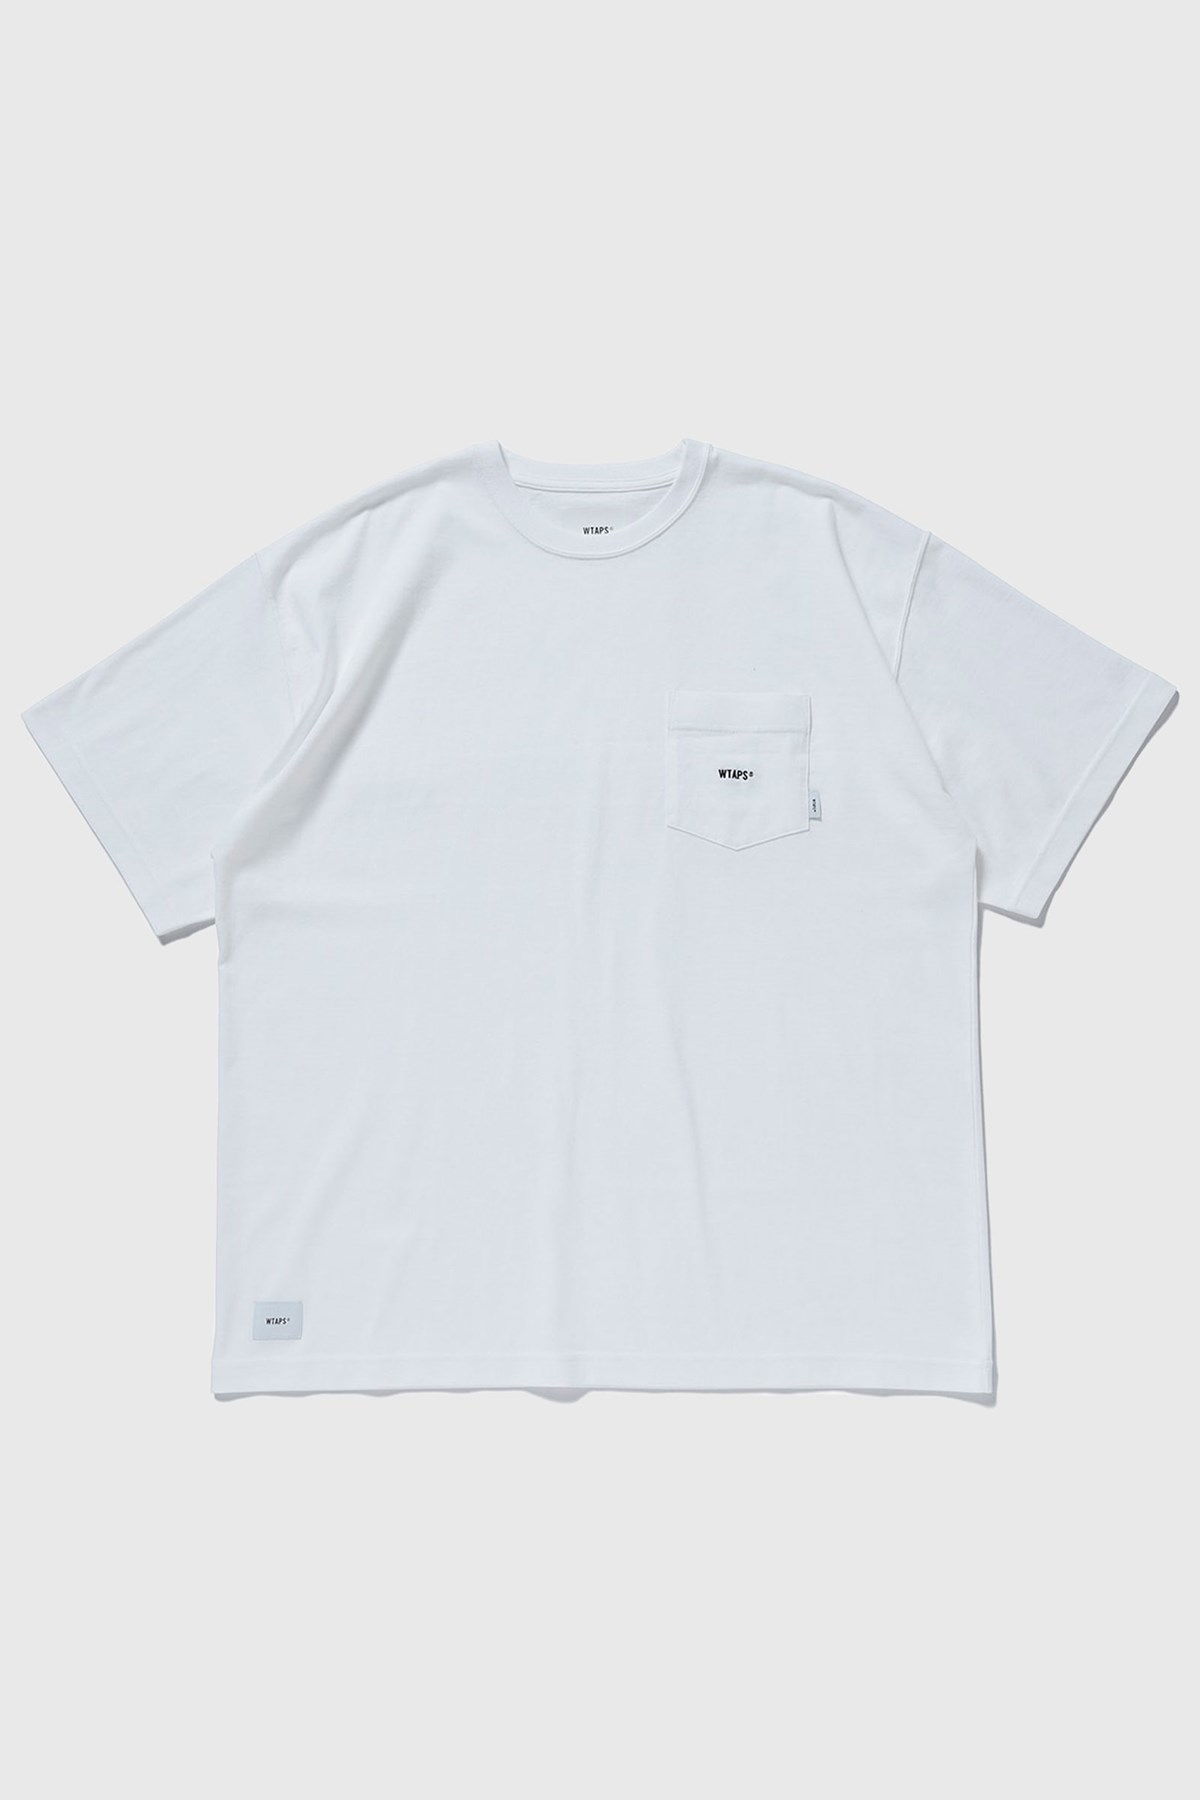 WTAPS ALL 02 / SS / COTTON White | WoodWood.com